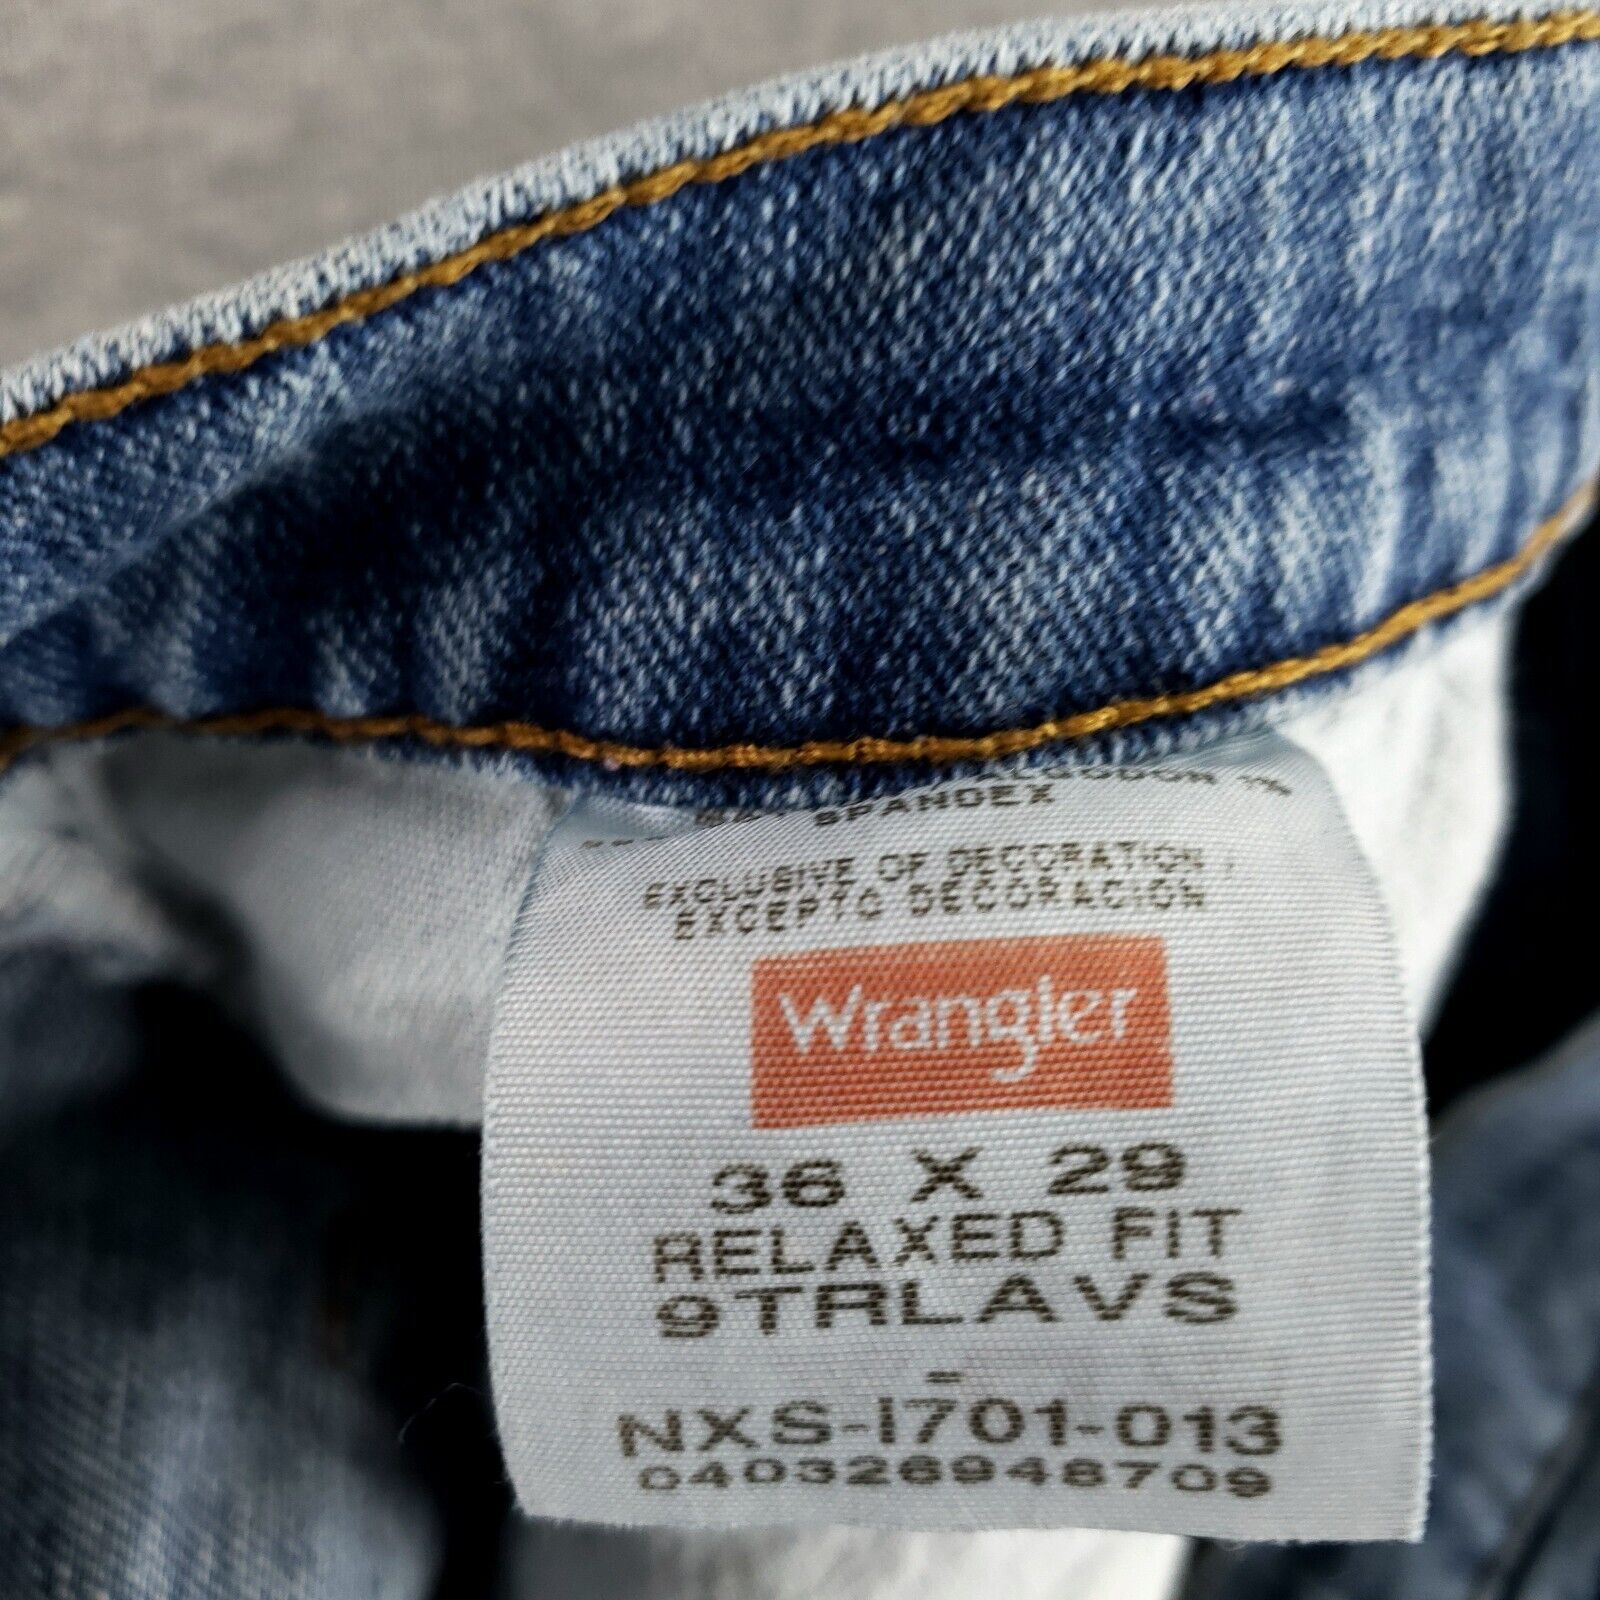 Wrangler 36x29 Relaxed Fit Blue Jeans Stretch Fle… - image 3